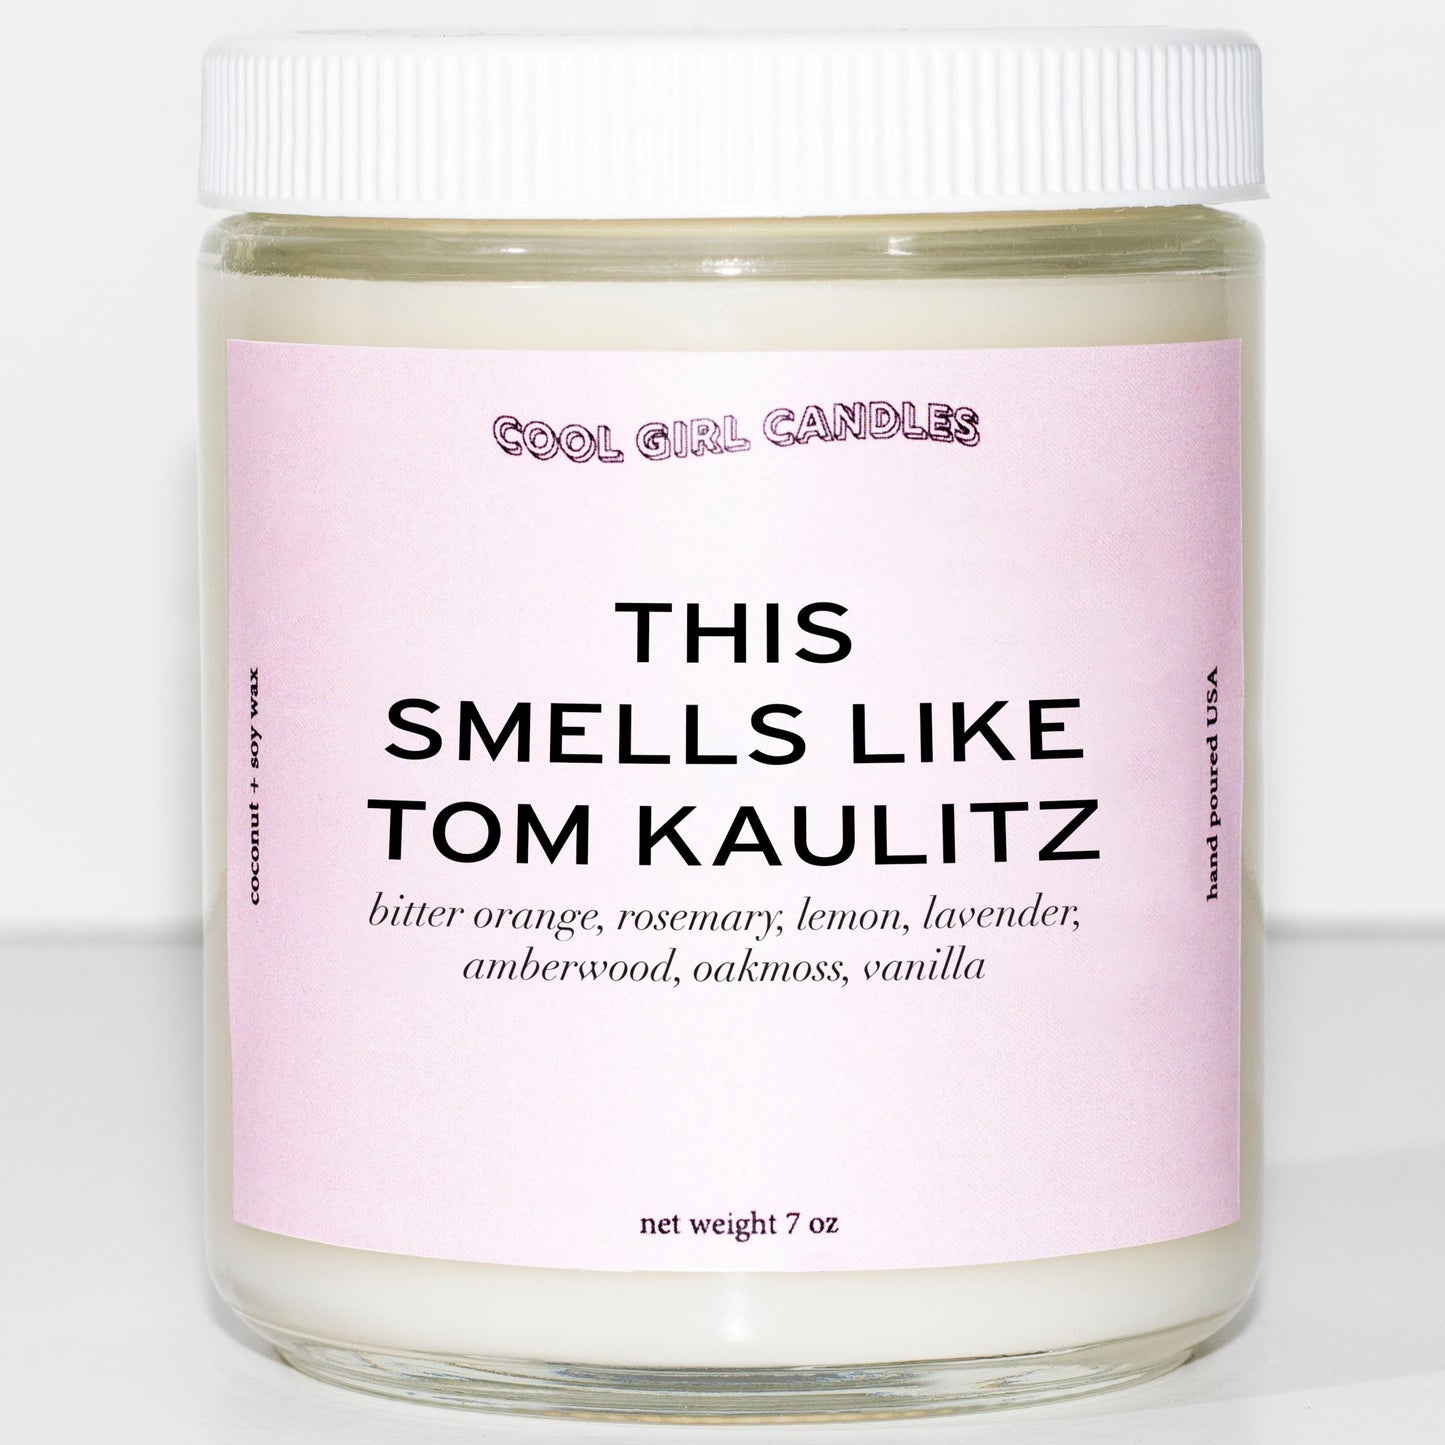 this smells like tom kaulitz candle. A candle by cool girl candles that smells like your favorite celebrity musician Tom Kaulitz